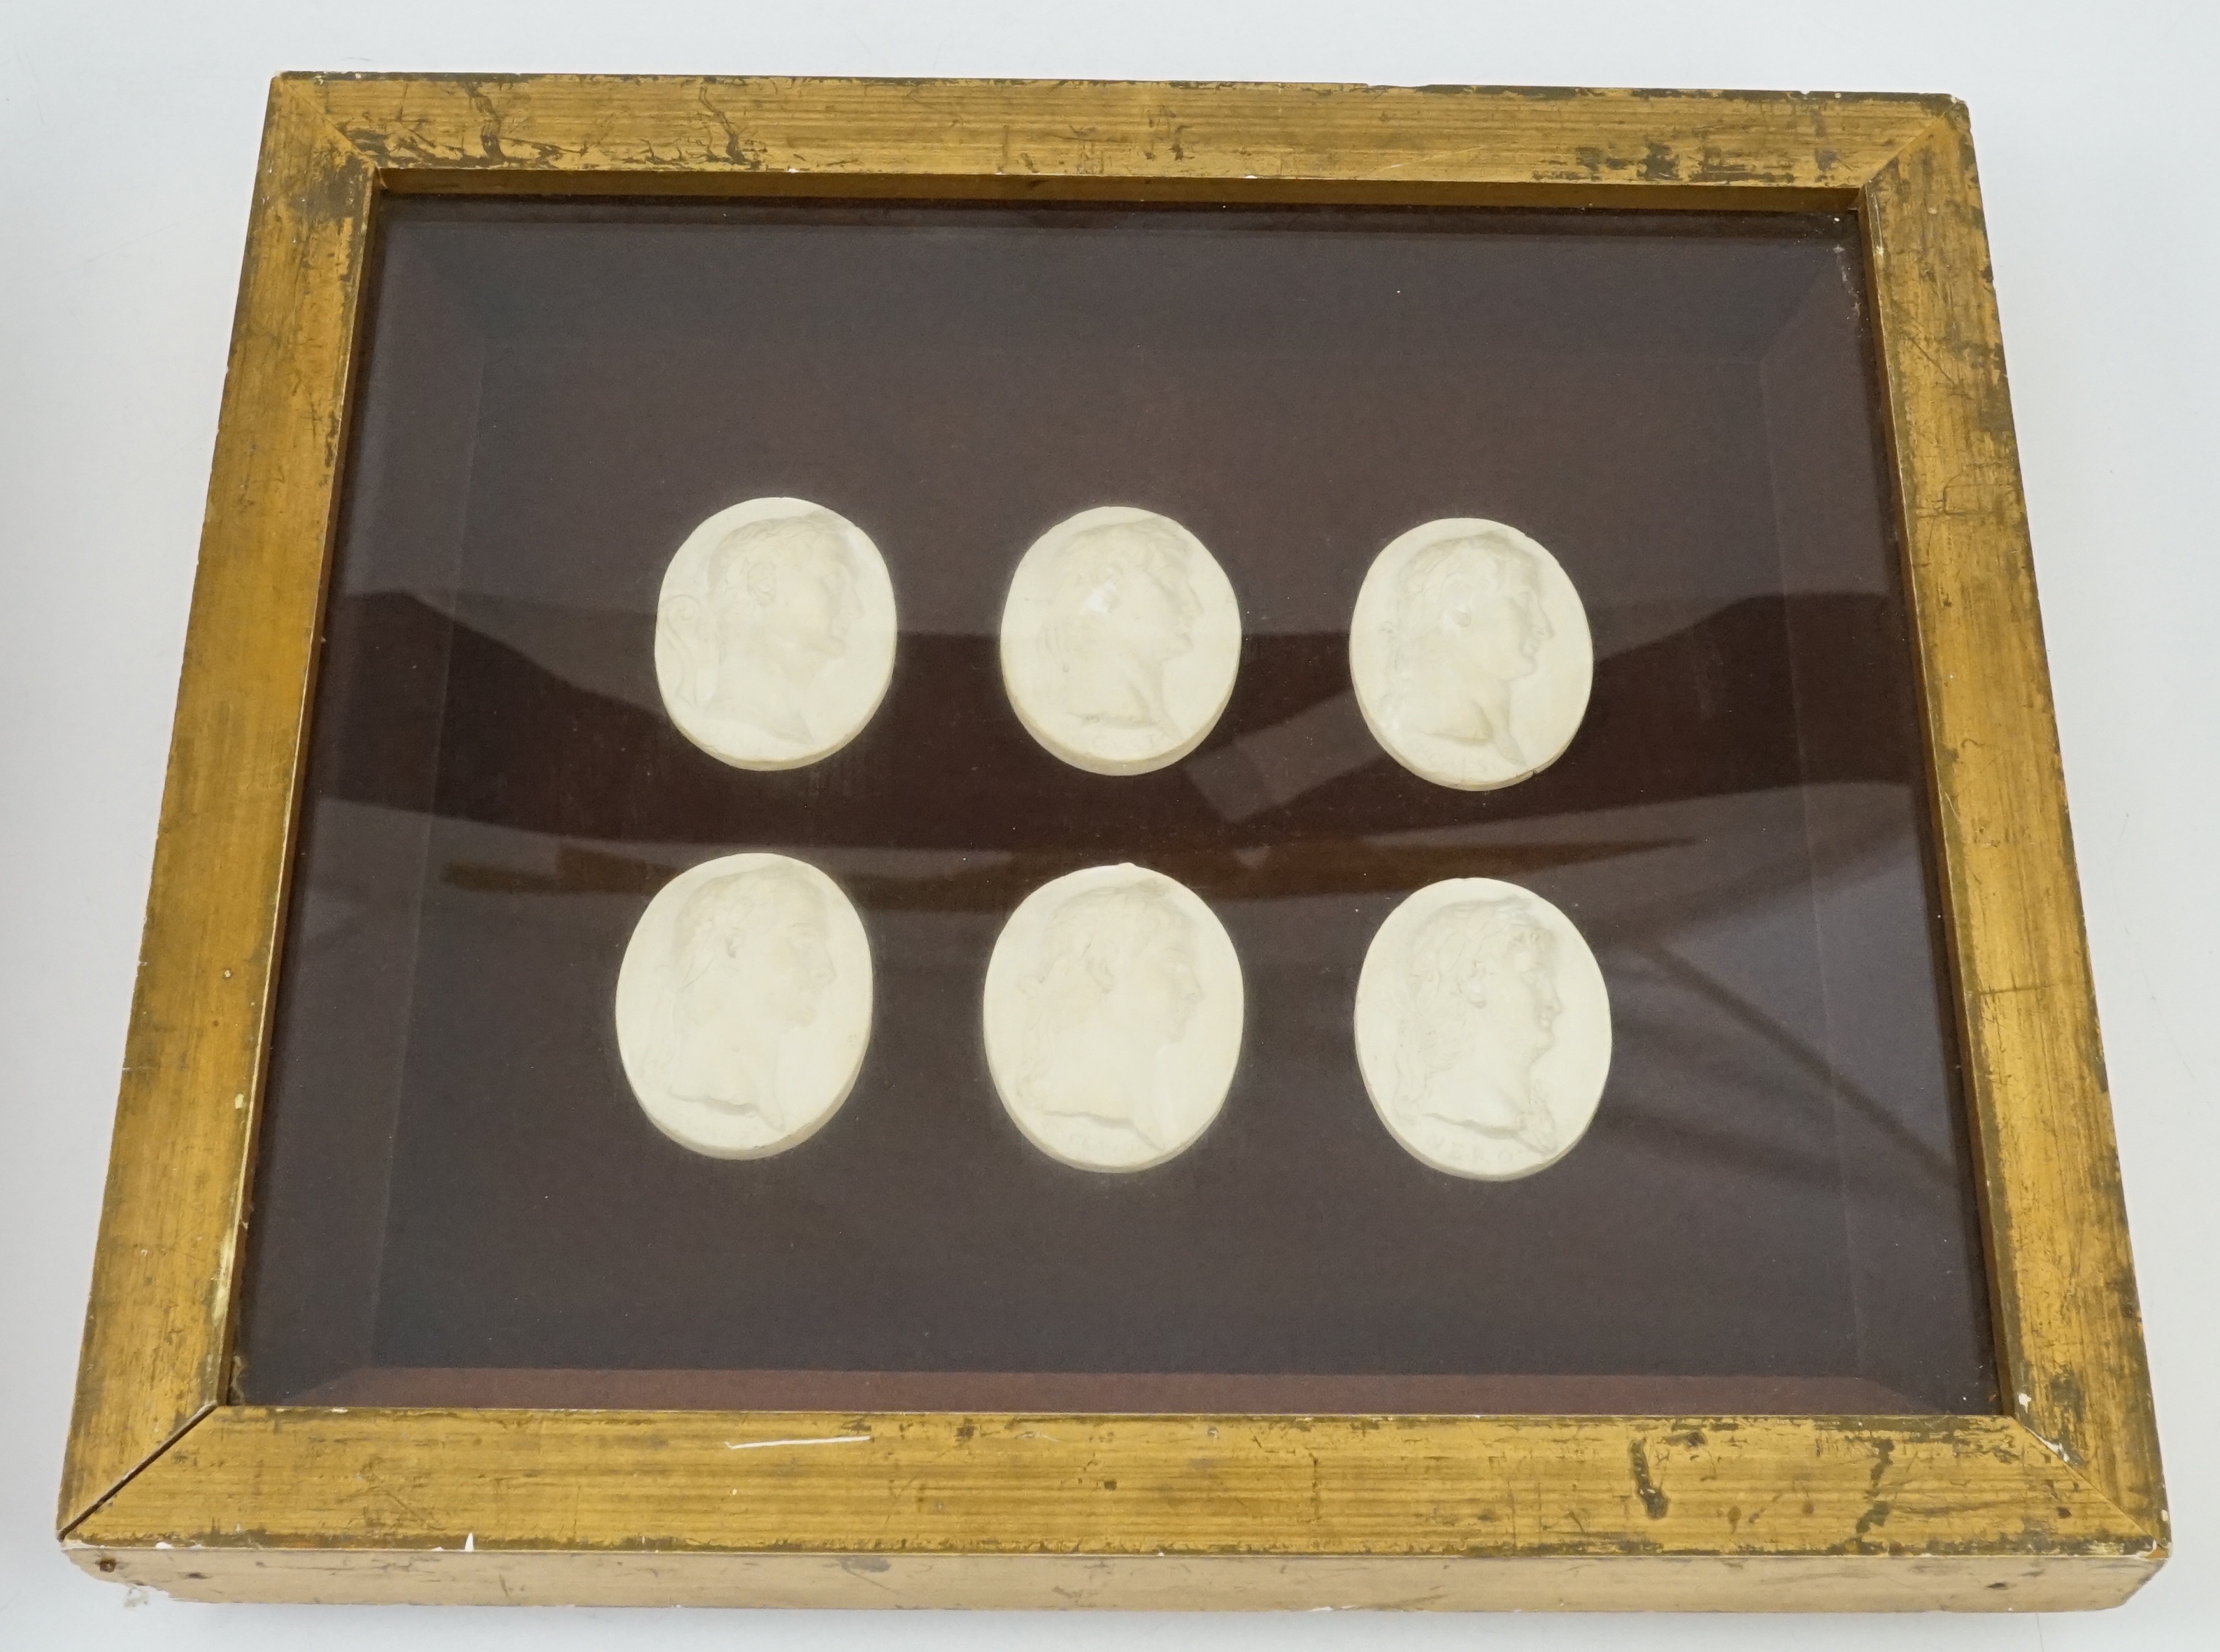 Three framed sets of simulated plaster classical gems, largest overall 30 x 30cm